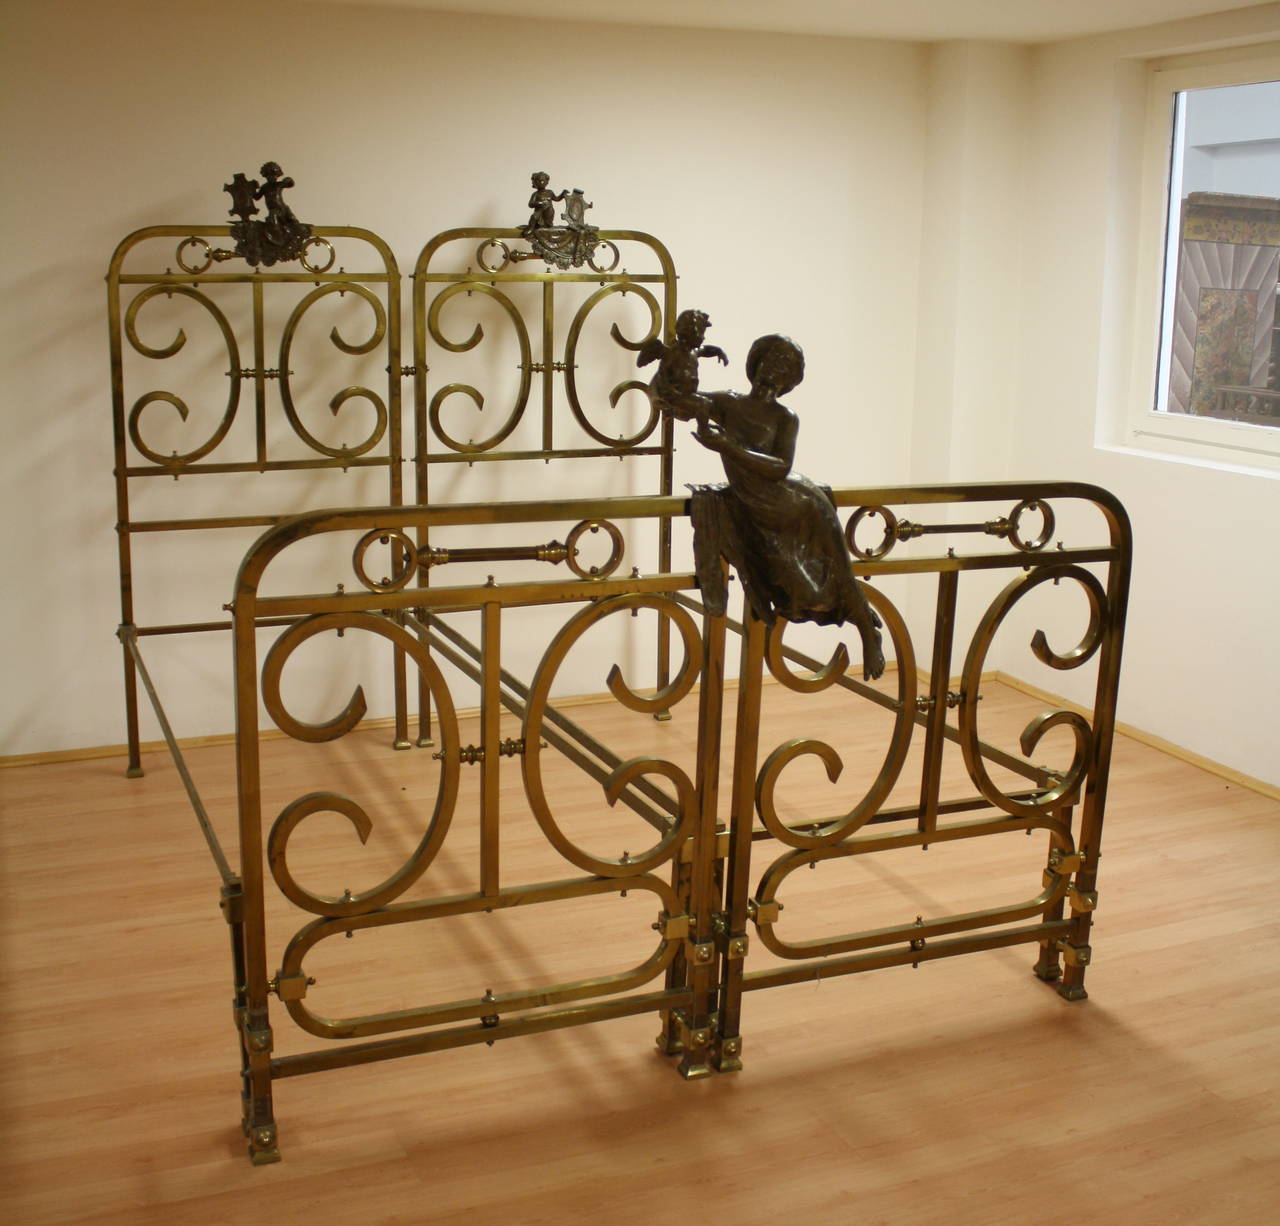 Masterpiece of a Pair brass beds toped with Angels on the headboard and fixed together with a Lady figure holding an Angel at the food of the bed.
One stake is missing inside at the Food end of the bed.
Inside from Head to Food: L 212cm (203cm), W